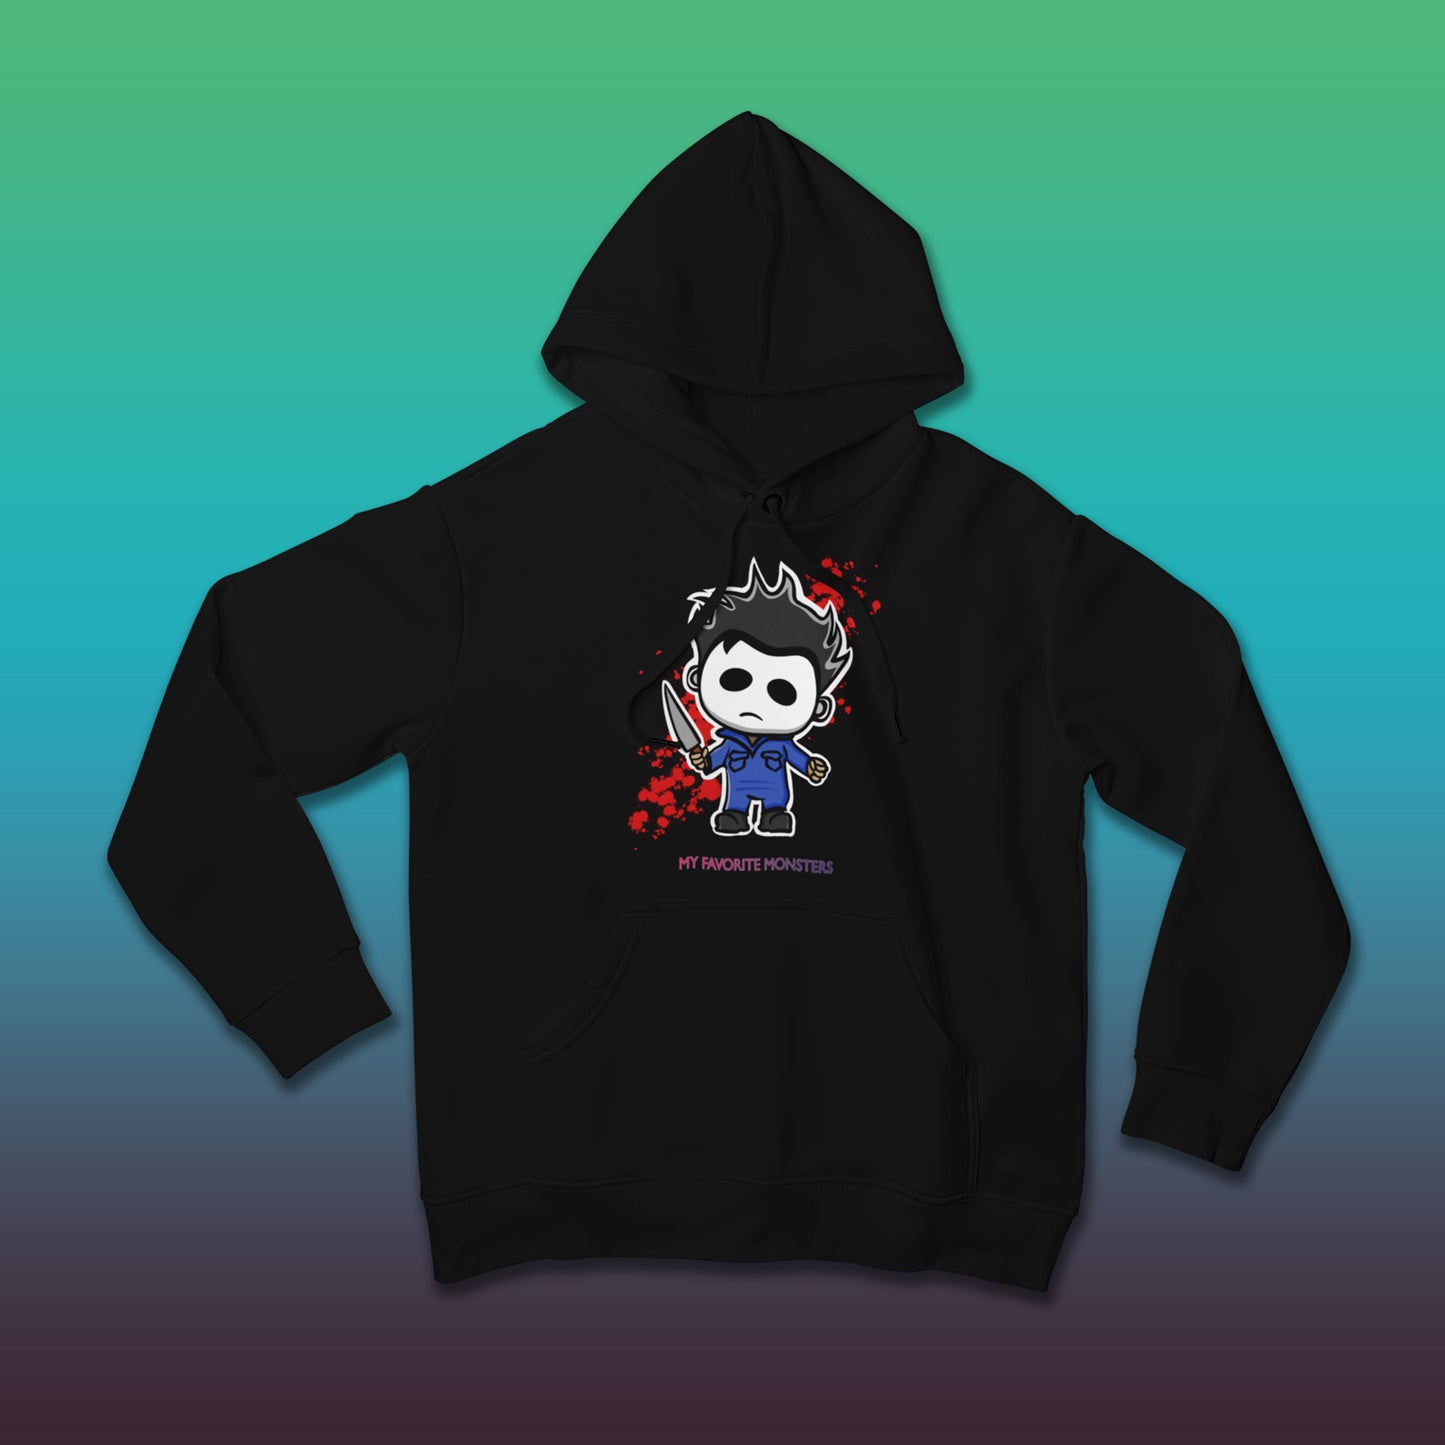 "Born Bad" Pullover Hoodie